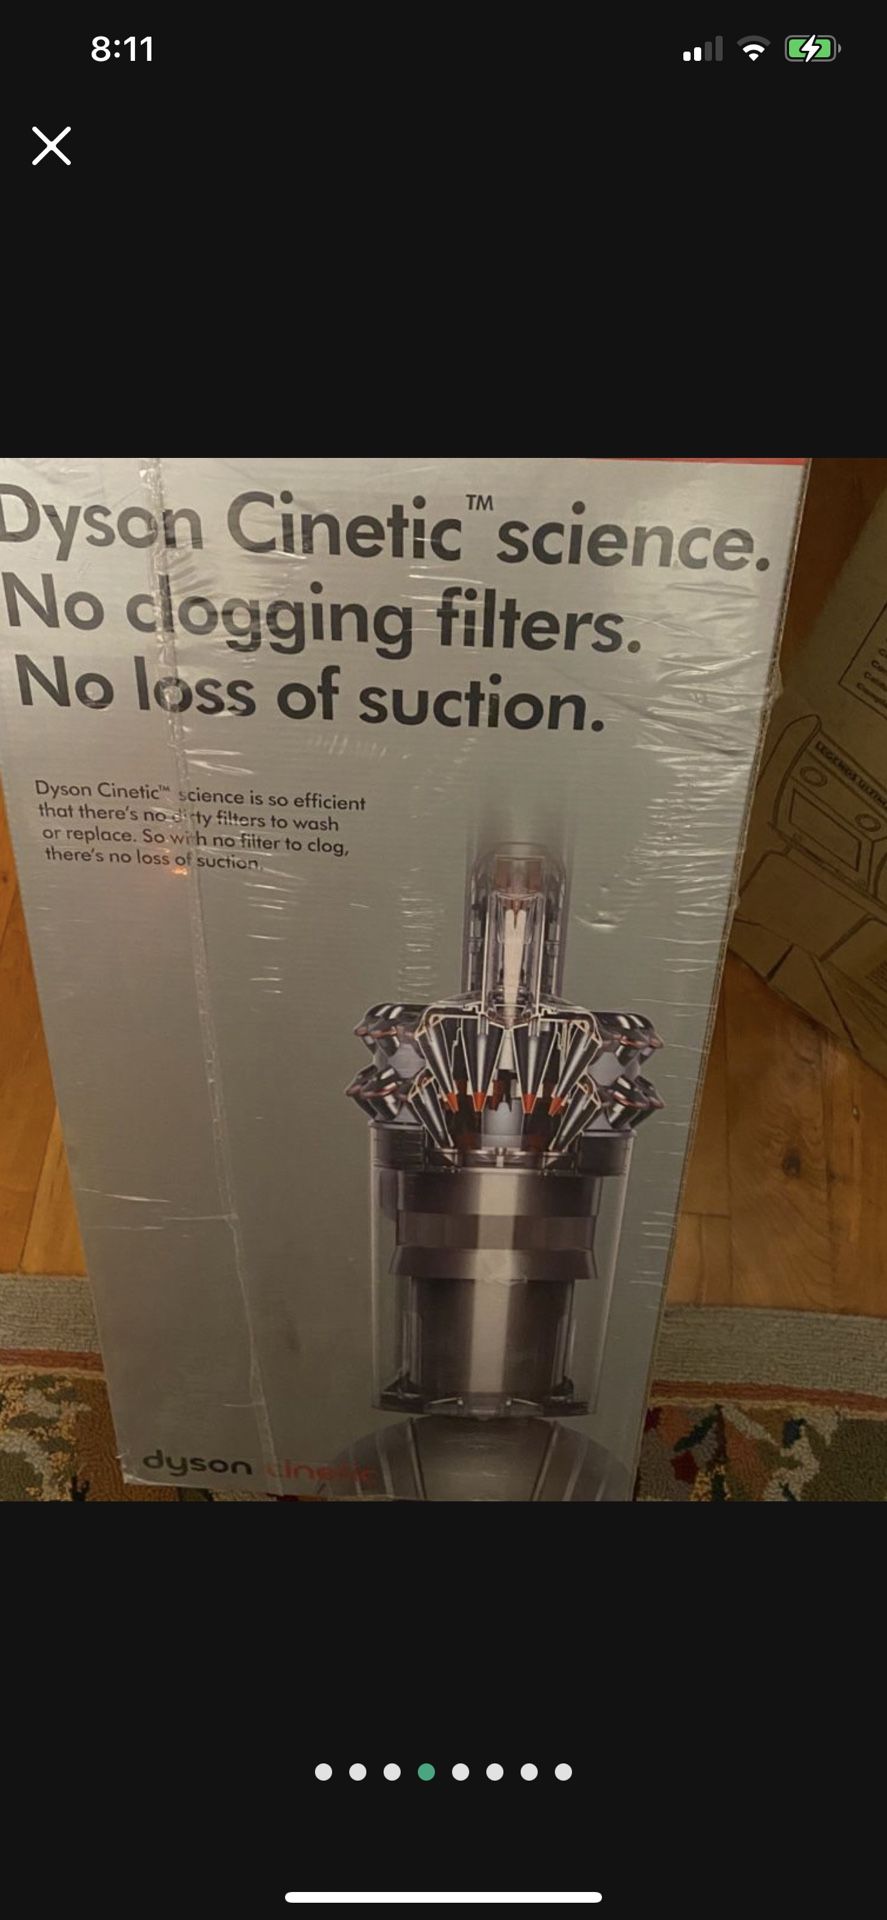 DYSON - CINETIC BIG BALL ANIMAL + ALLERGY UPRIGHT VACUUM - IRON/NICKE best  Vac out there new new  $420 OBO   New 